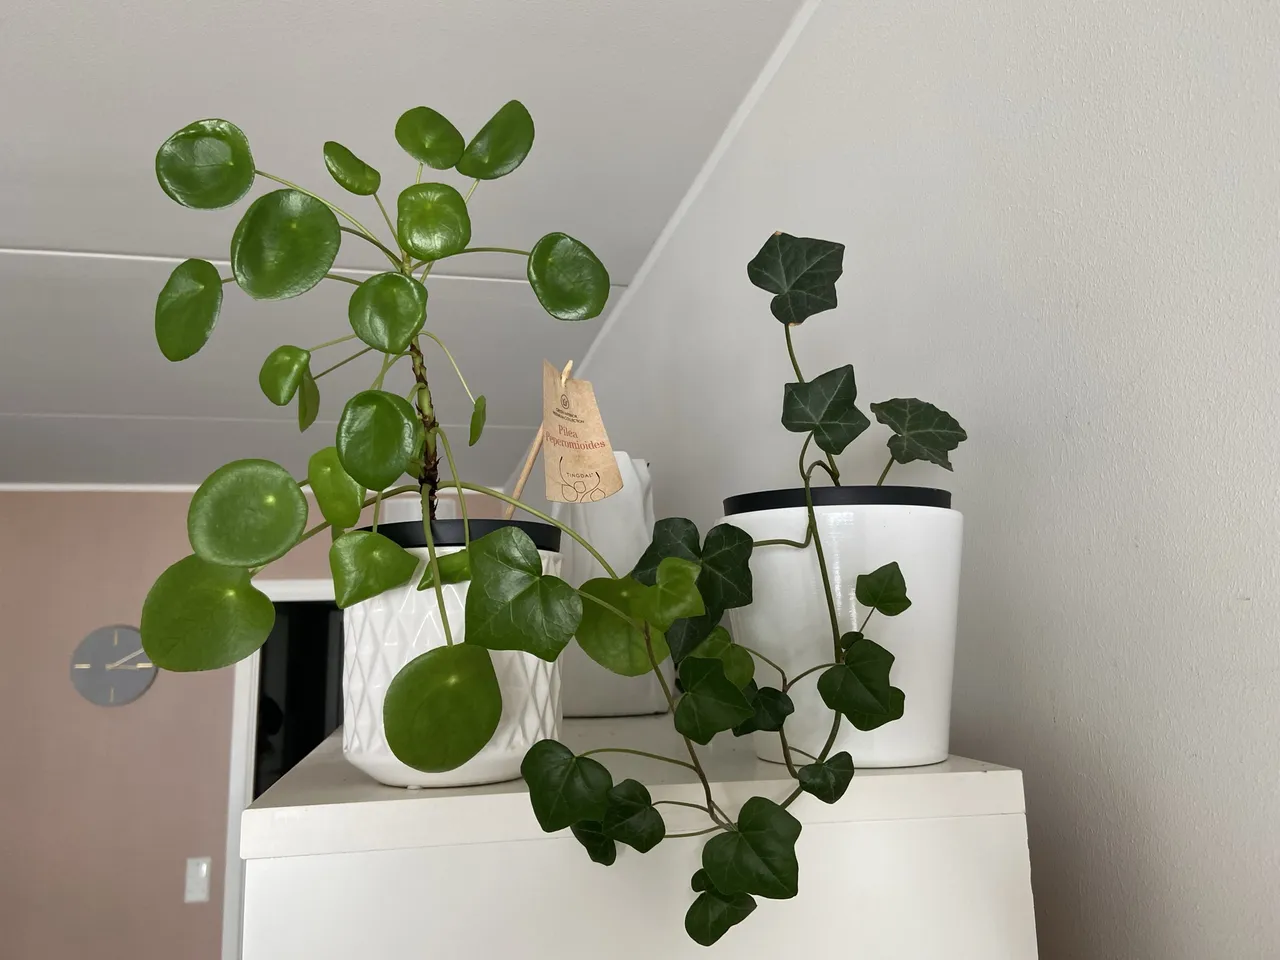 Pilea peperomiodes and Ivy. For those with cats, remember that Ivy is poisonous for them. Keep the Ivy at a place your cat cant reach.